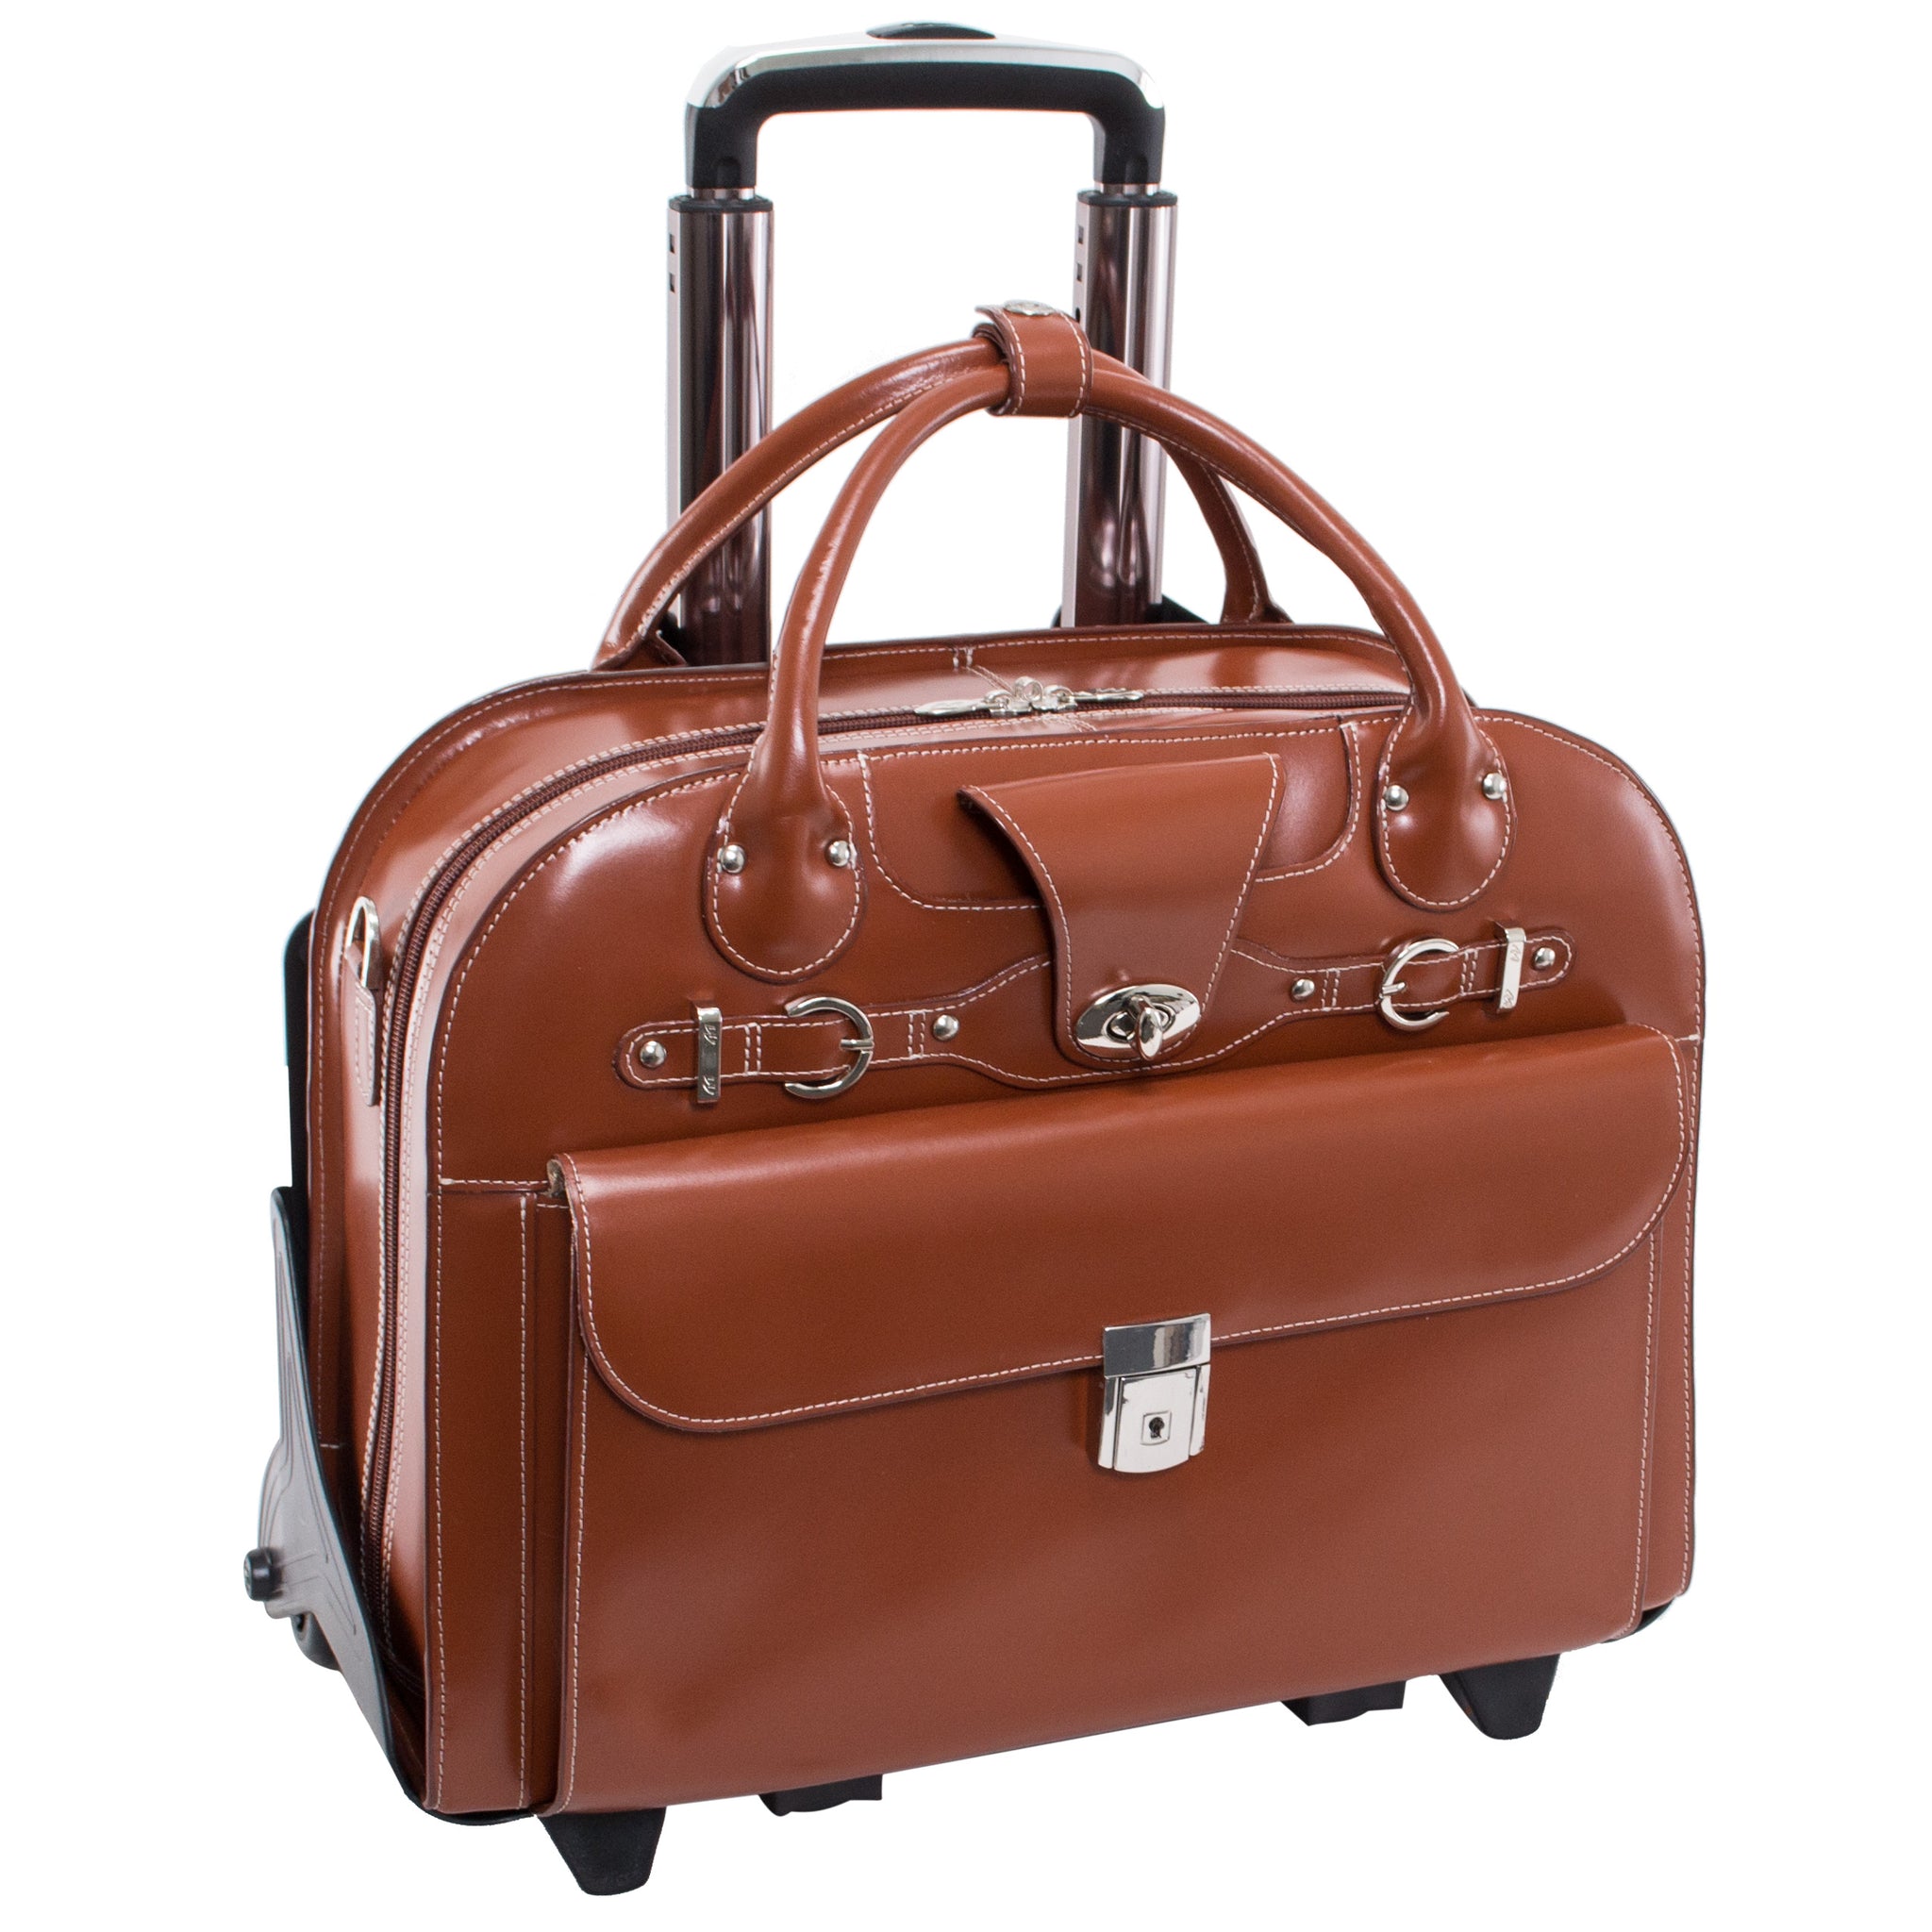 McKlein ROSEVILLE 15" Leather Fly-Through Checkpoint-Friendly Patented Detachable -Wheeled Laptop Briefcase